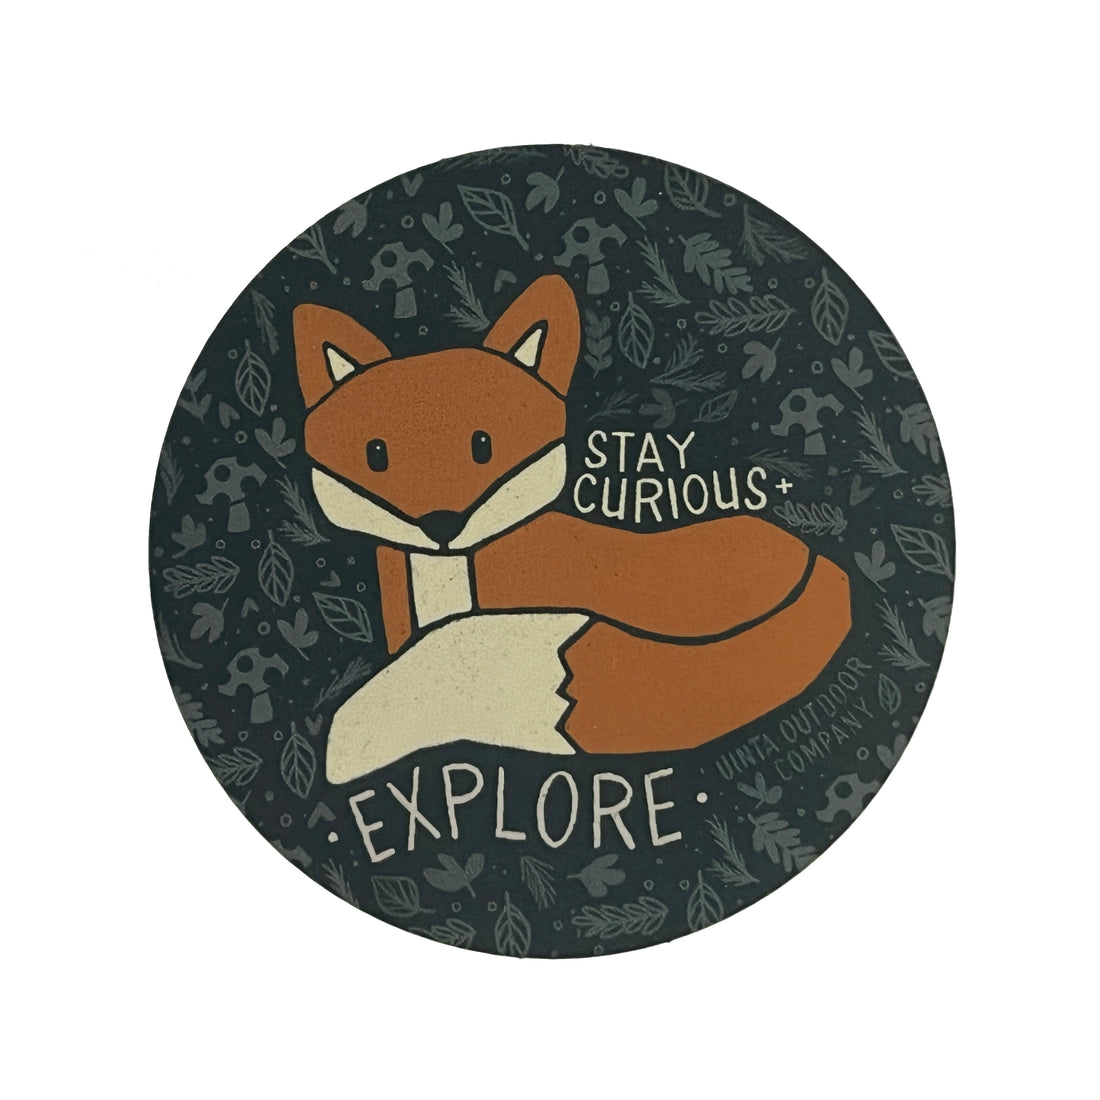 Circle sticker with dark blue background and lighter blue natural elements creating a pattern. Subject is an orange fox laying down with the words: Stay Curious + Explore in off-white surrounding it.